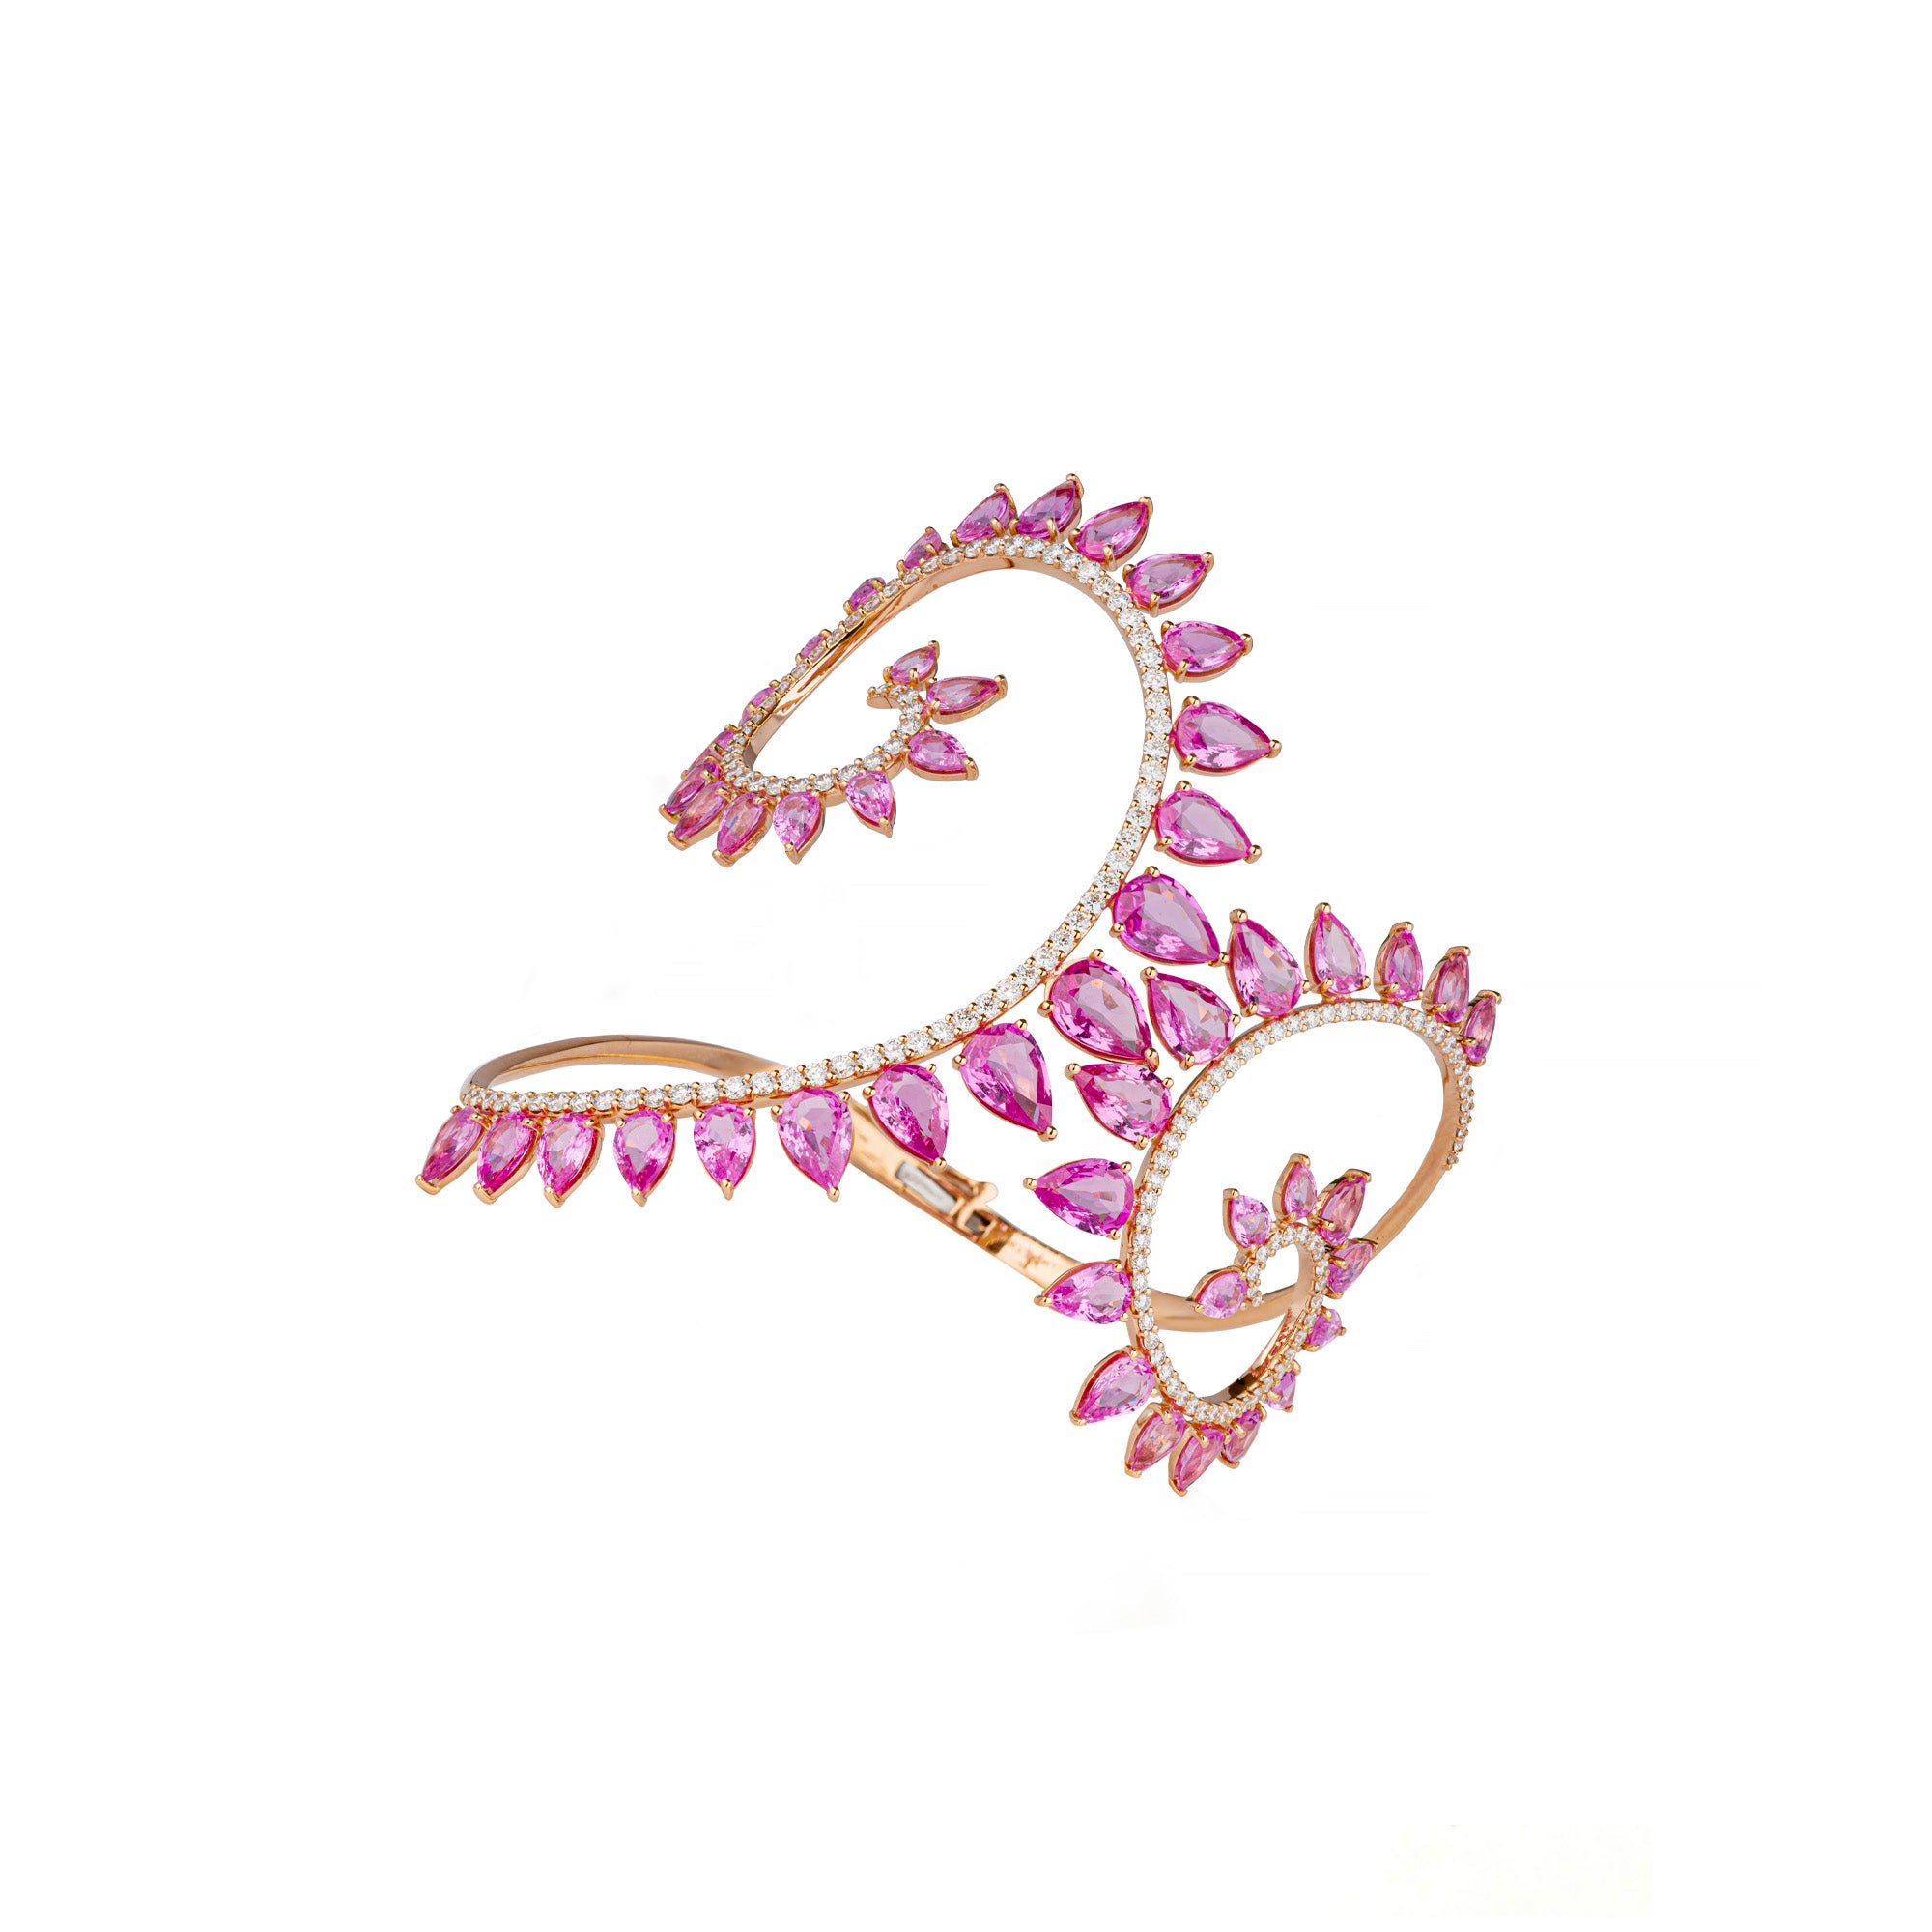 Genesi Rose Gold Bracelet With Pink Sapphires and Diamonds